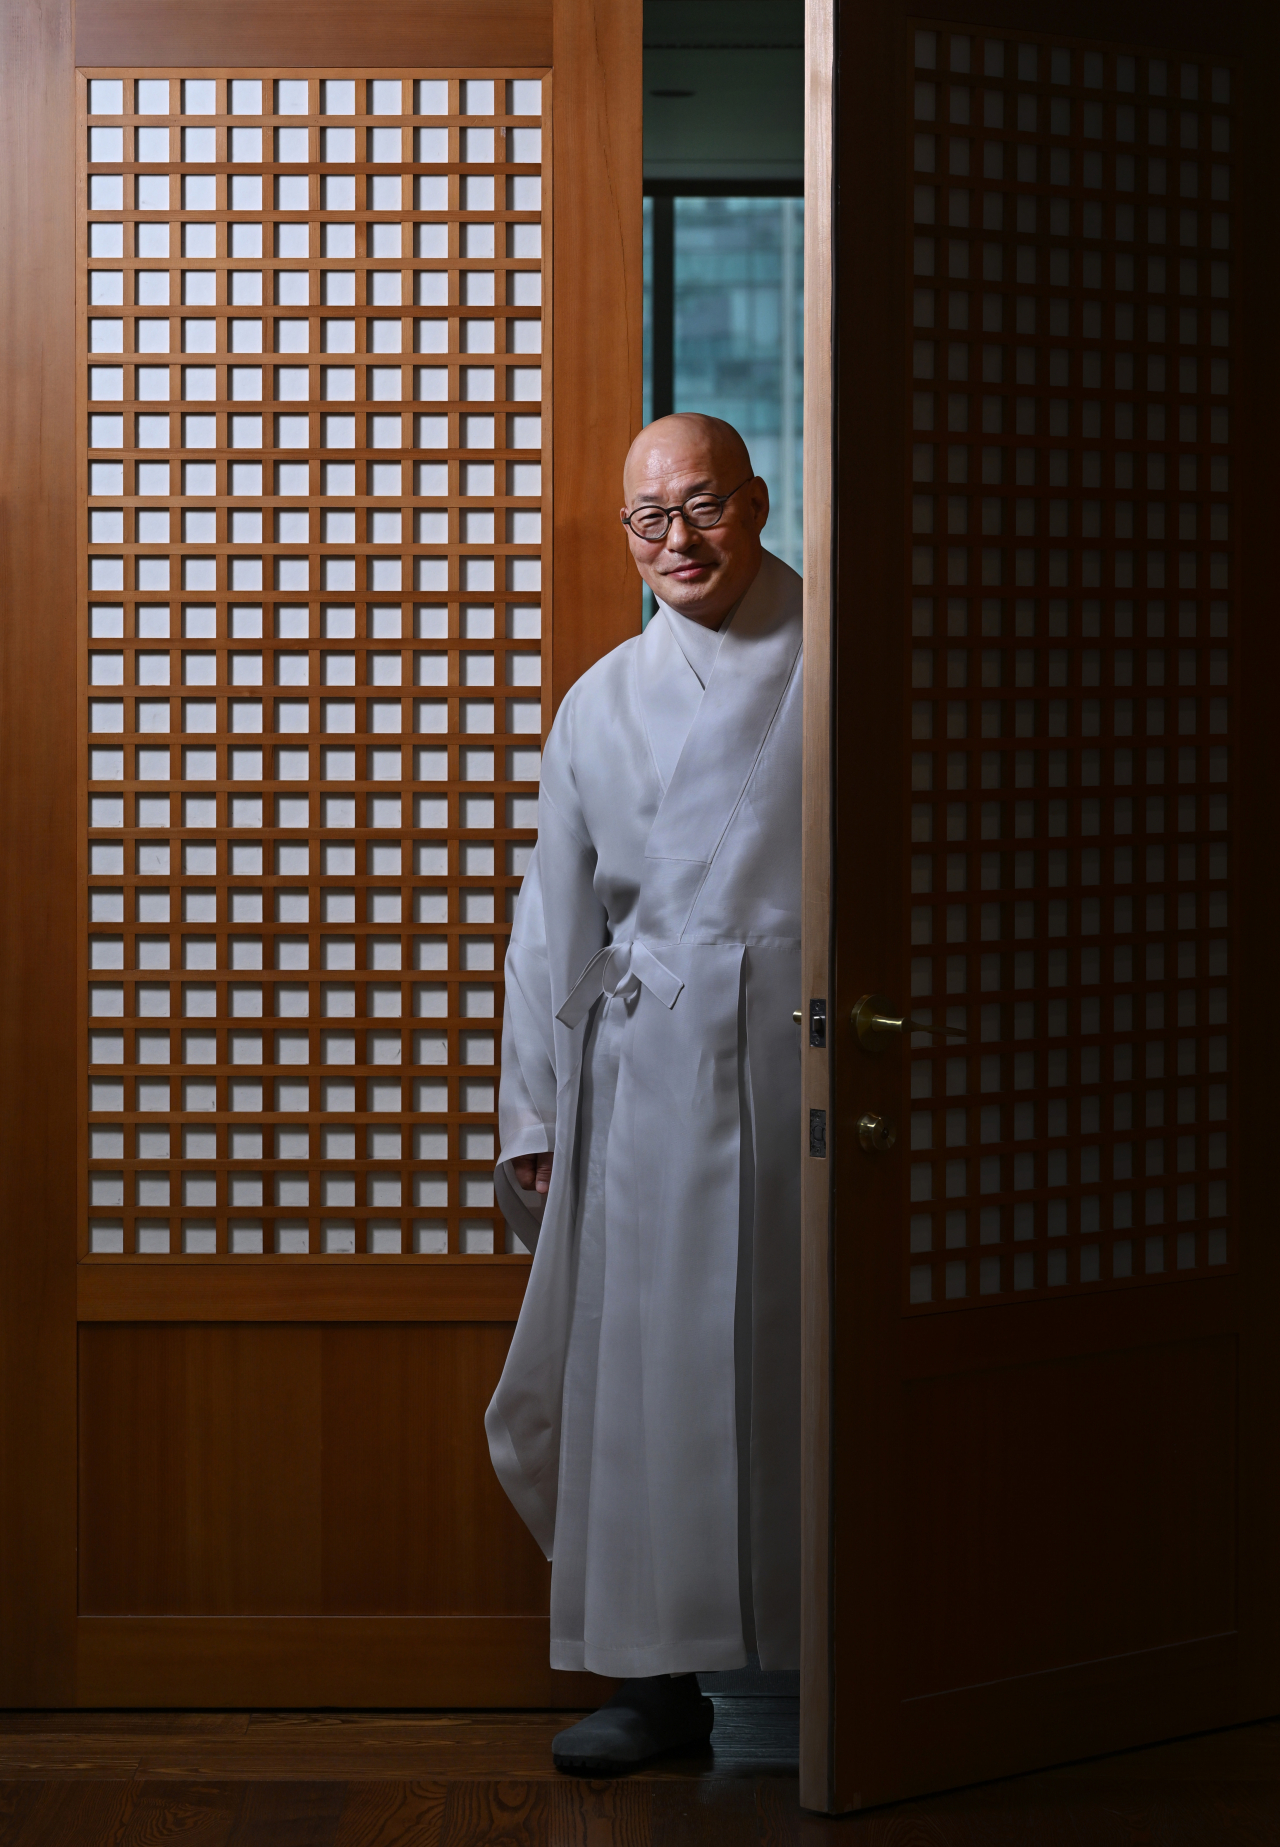 The Ven. Jinwoo, president of the Jogye Order of Korean Buddhism, poses for a photo ahead of an interview with The Korea Herald at Jogyesa in Seoul on April 23. (Im Se-jun/The Korea Herald)